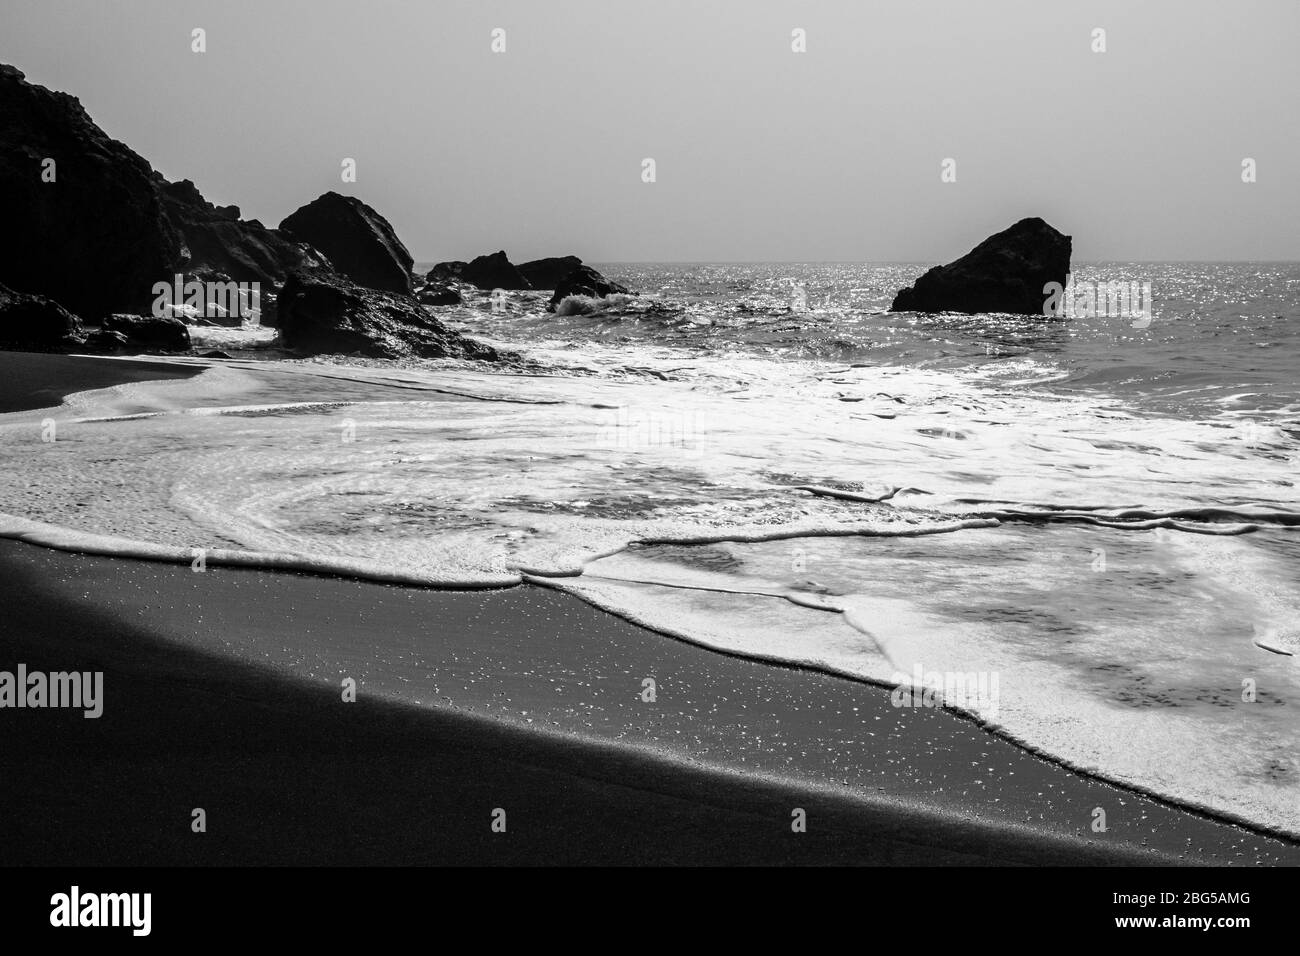 Coast in black and white with rock, La Palma, Canary Islands, Spain Stock Photo